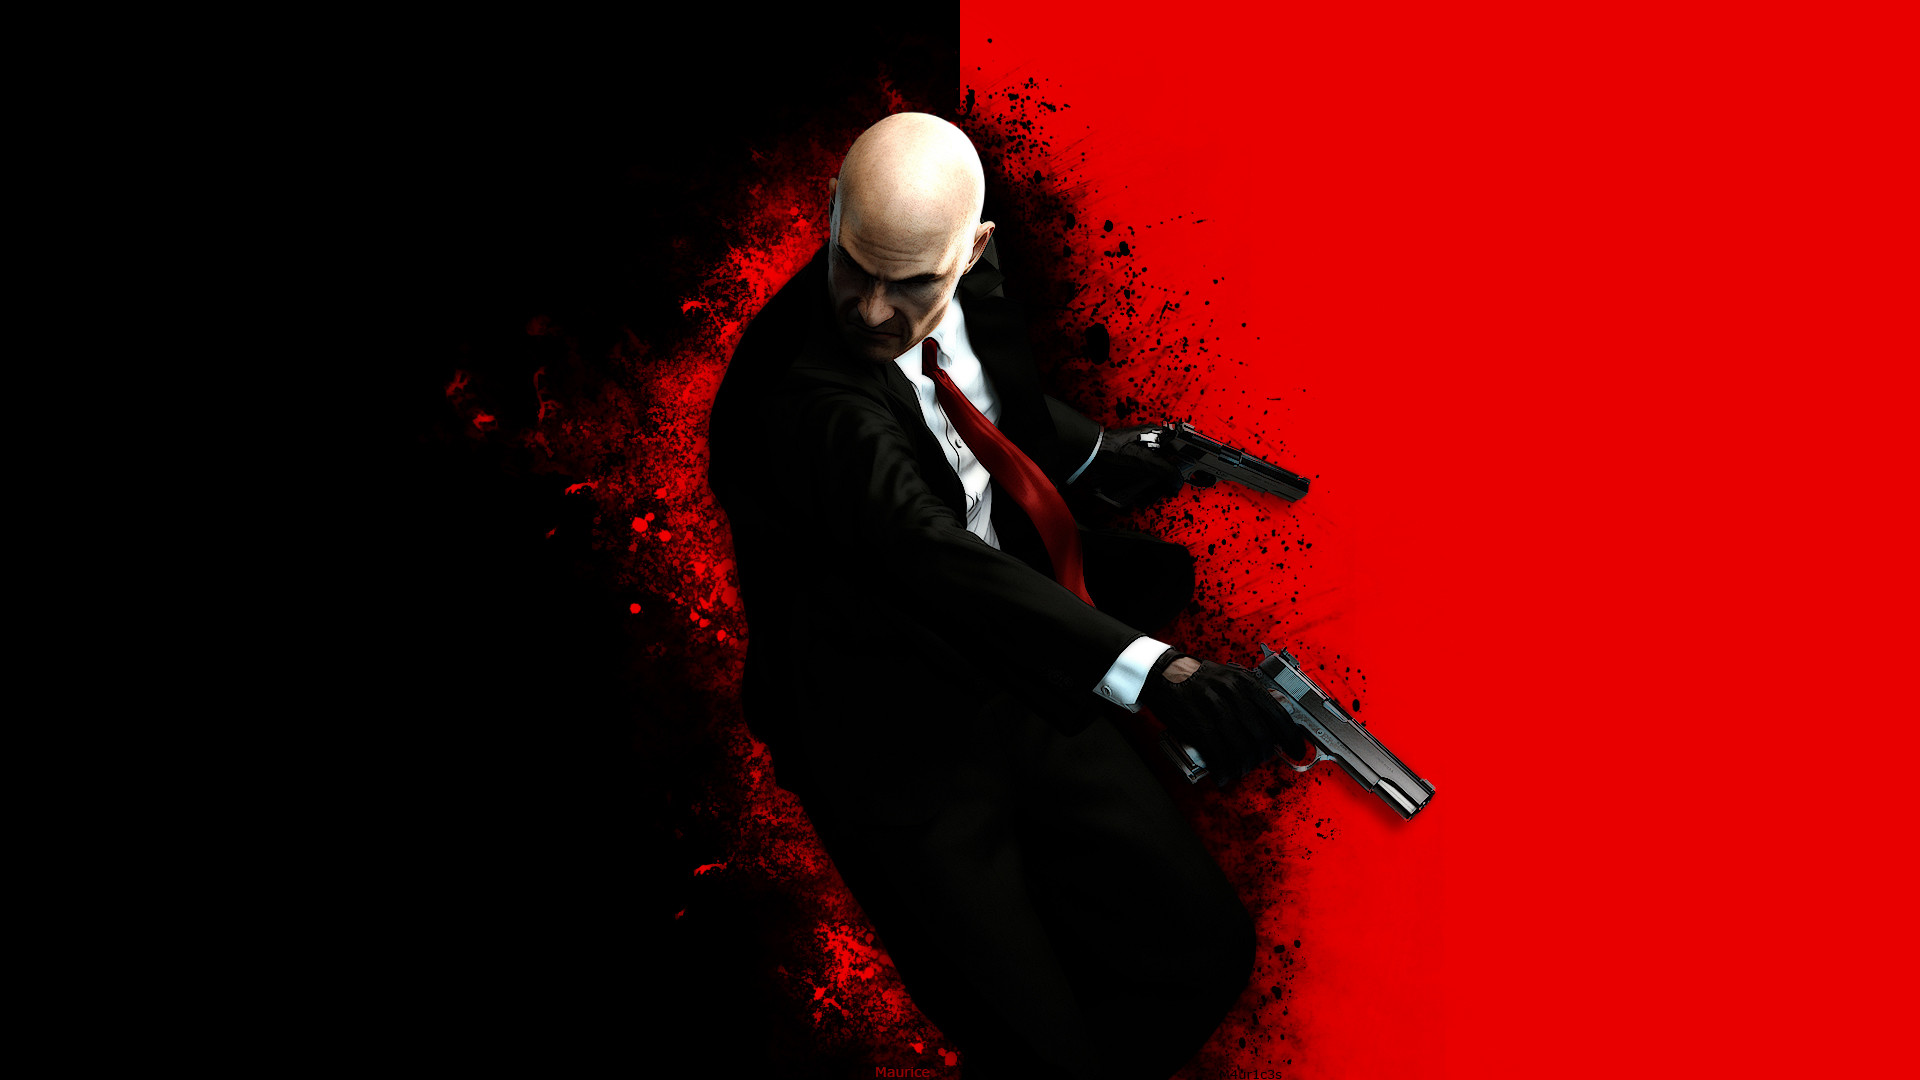 1920x1080 Hitman Absolution by M4ur1c3s Hitman Absolution by M4ur1c3s.